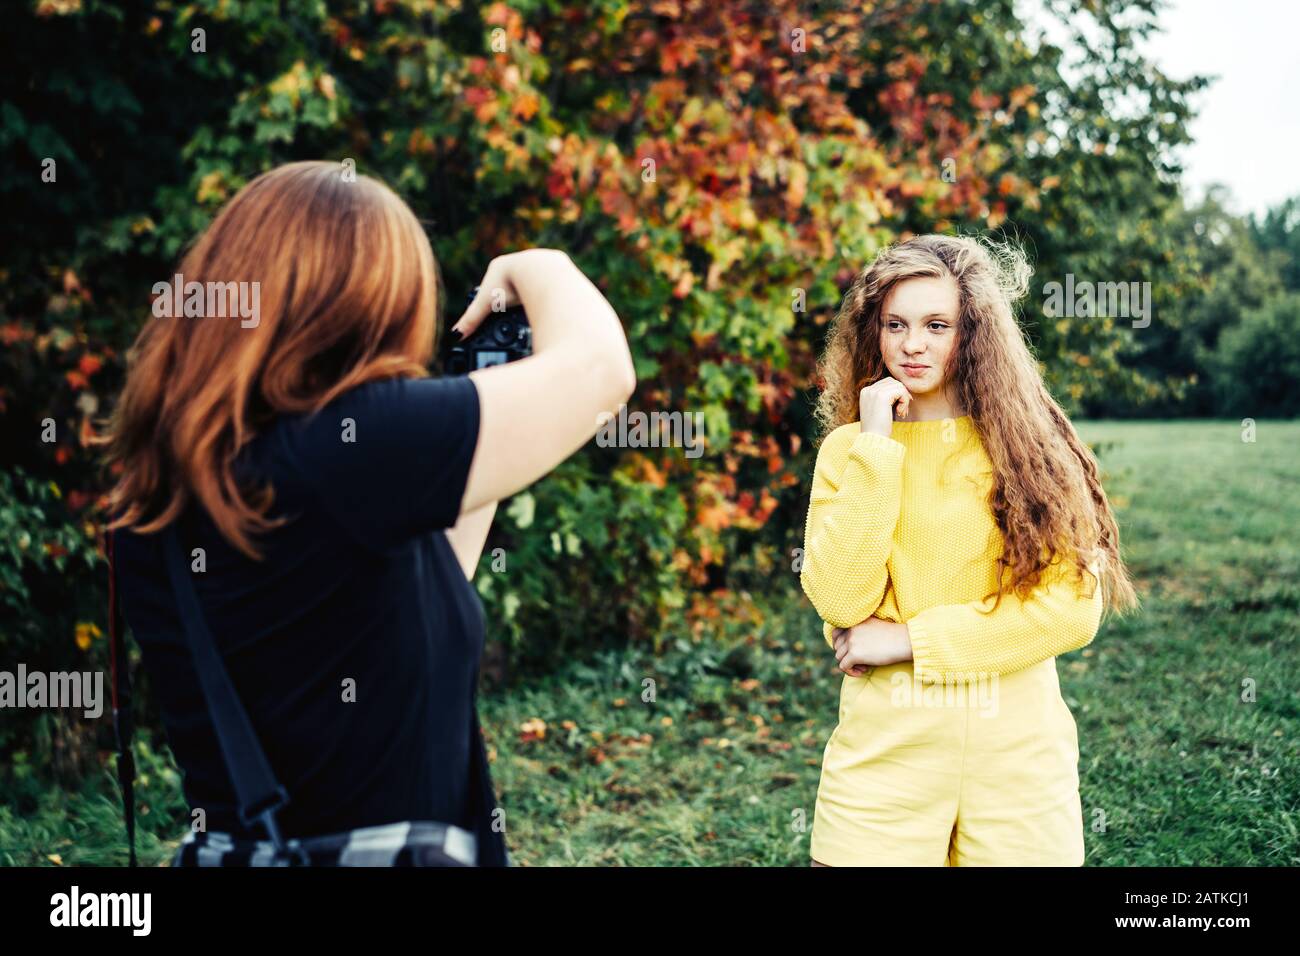 Woman photographer photographing a teenager girl with long red curly hair Stock Photo